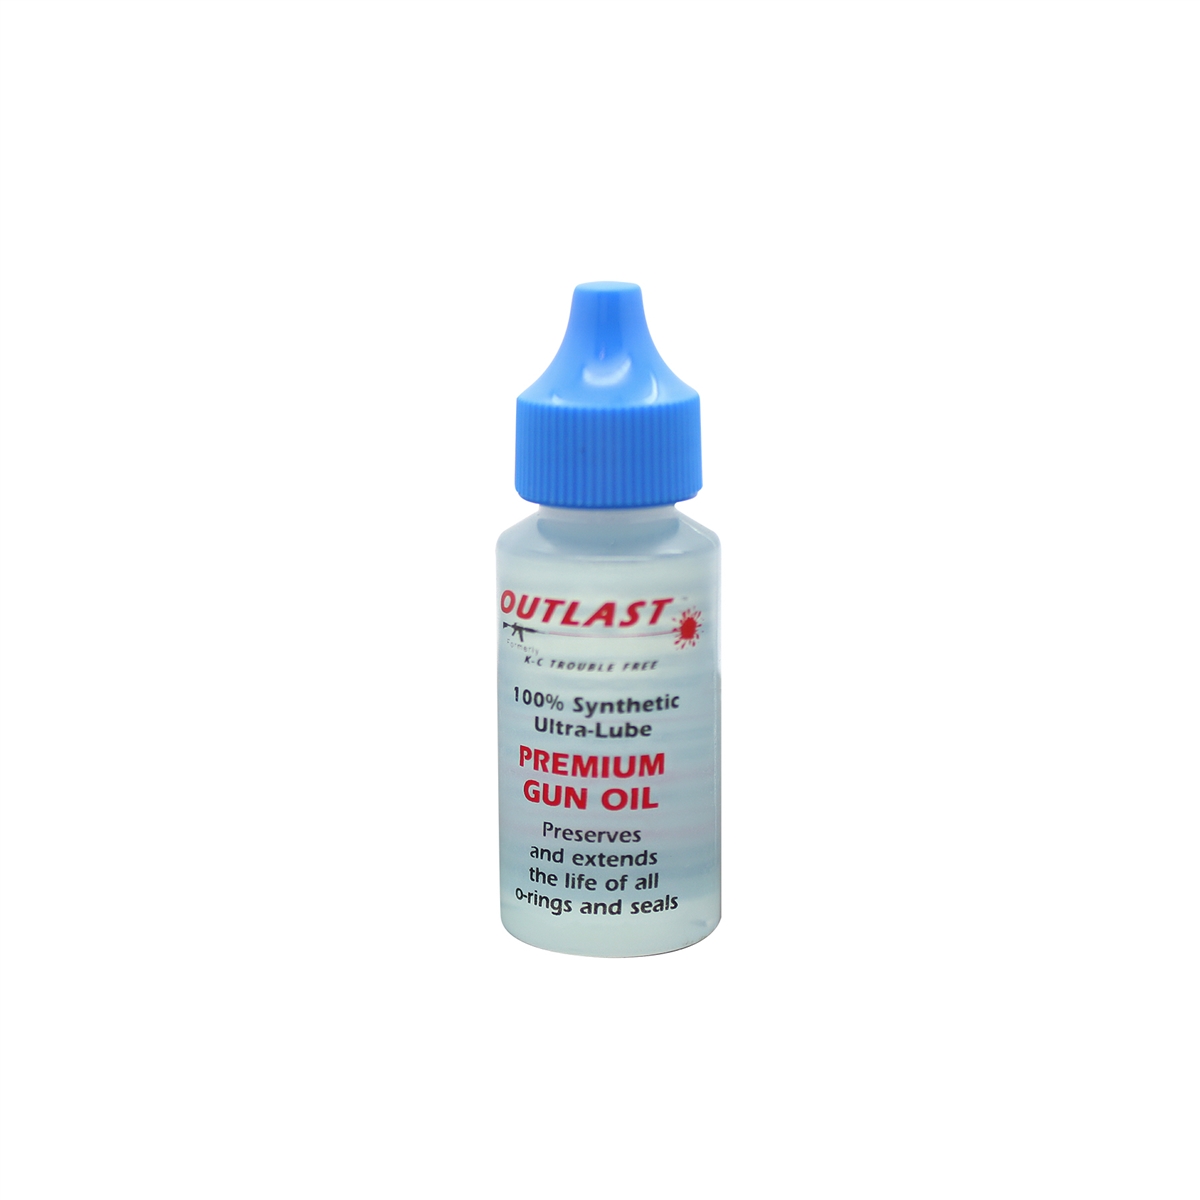 HUILE EASYWORK SILICONE 150 ML — SHOP-PAINTBALL